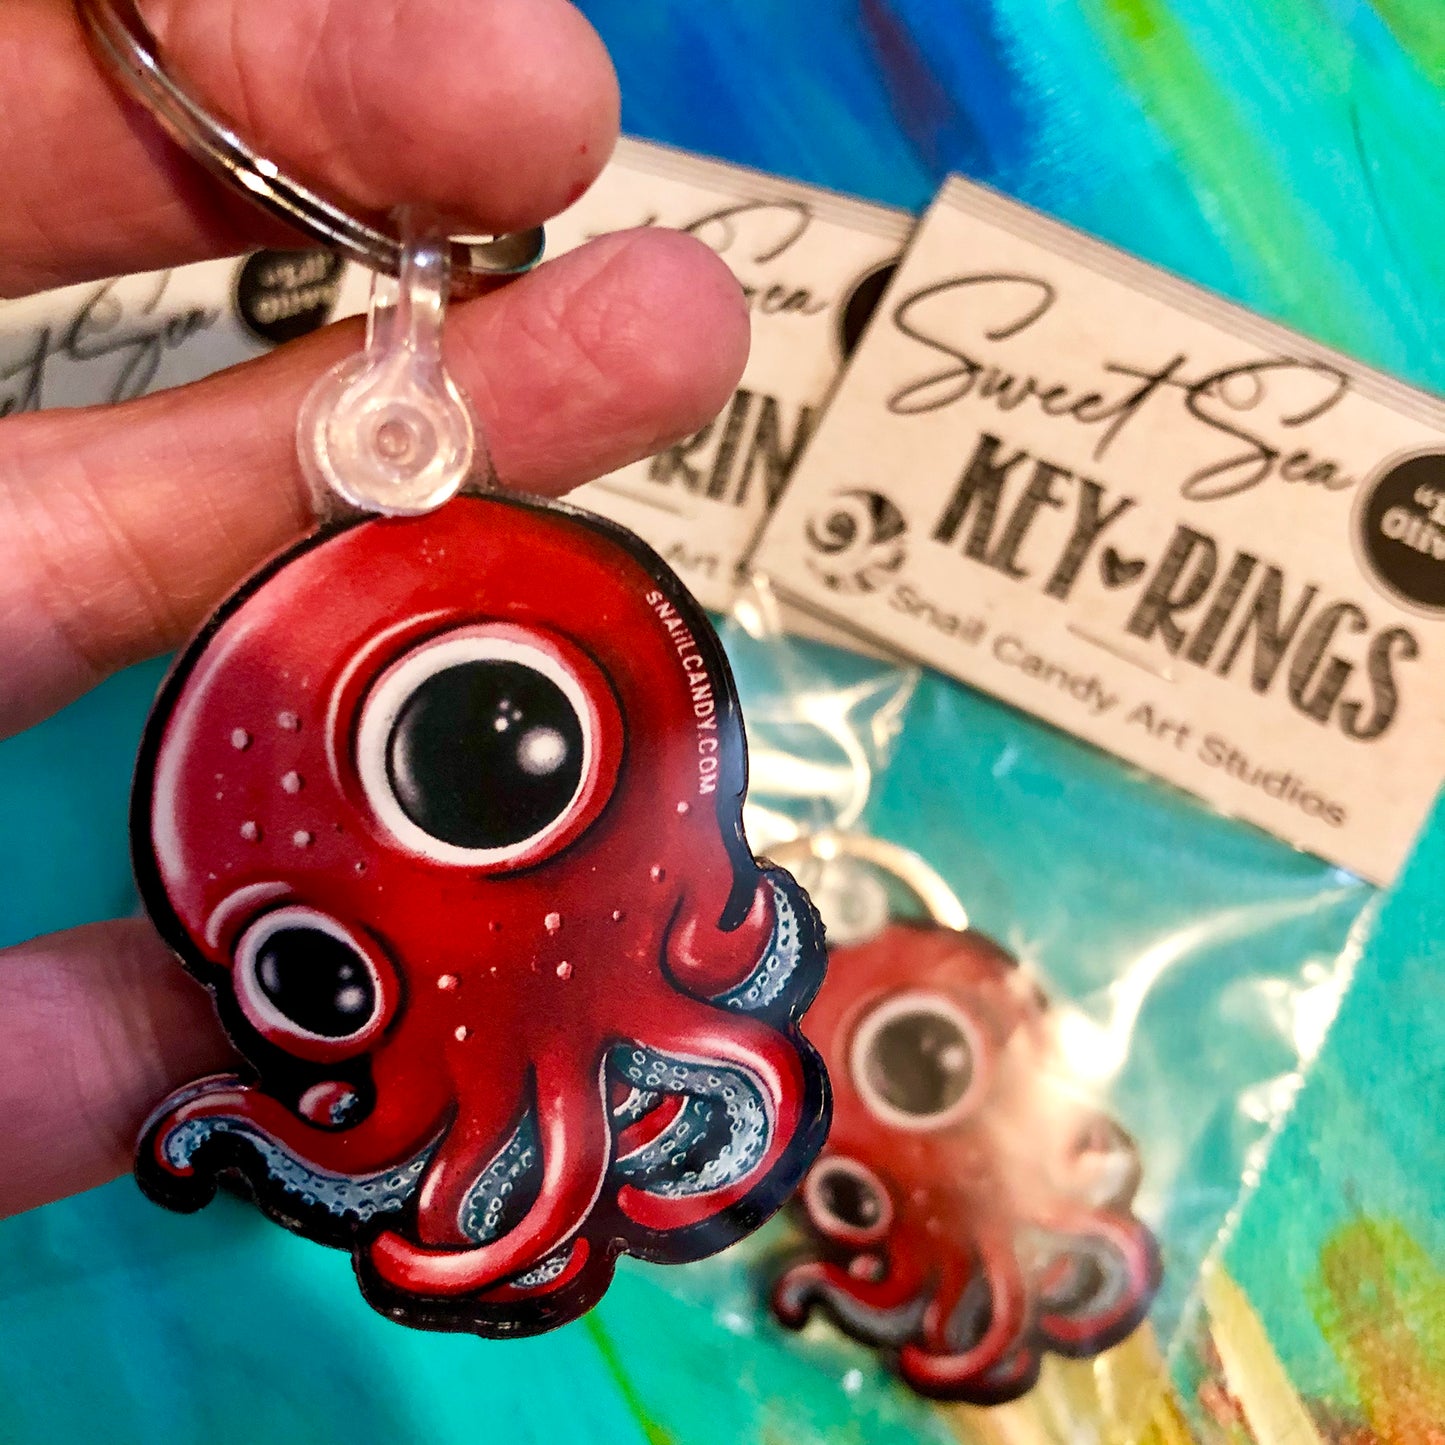 key charm - 'Olive' the Octopus by Tif Choate